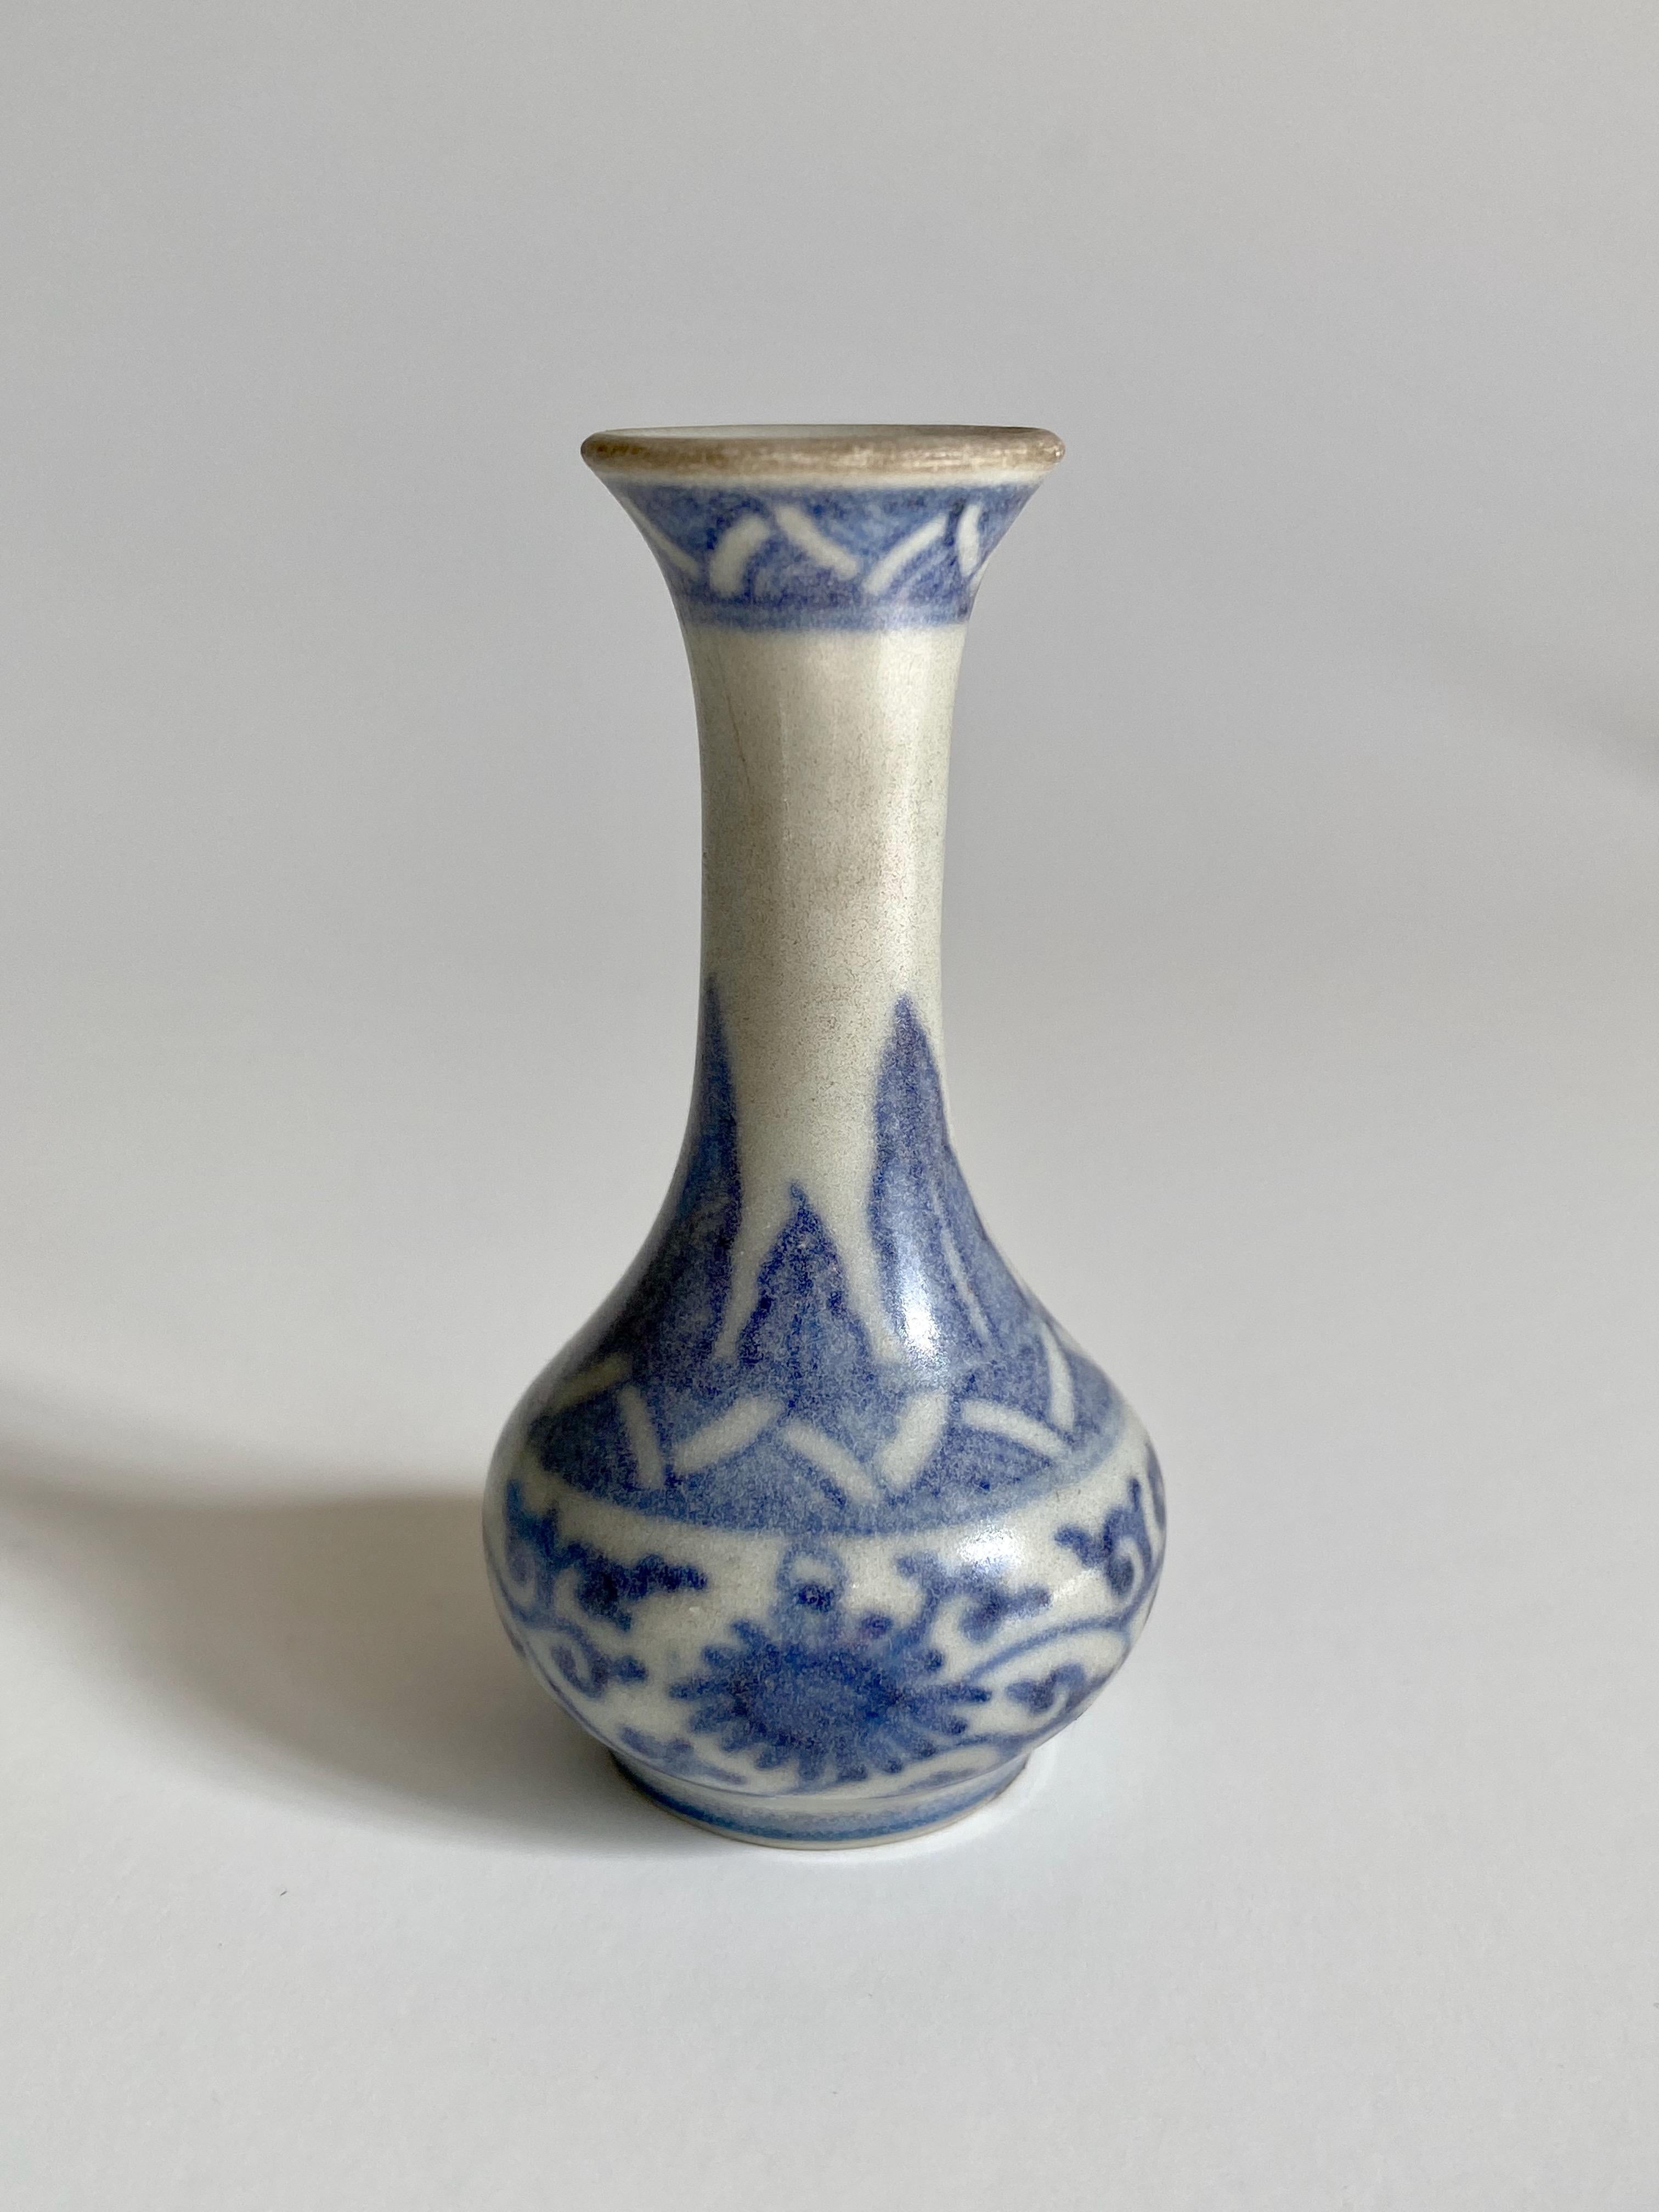 Miniature 17th century blue and white vase with a fluted rim and three bands of decoration 
 
This miniature vase was part of a hoard recovered by Captain Michael Hatcher from the wreck of a ship that sunk in the South China sea in approximately